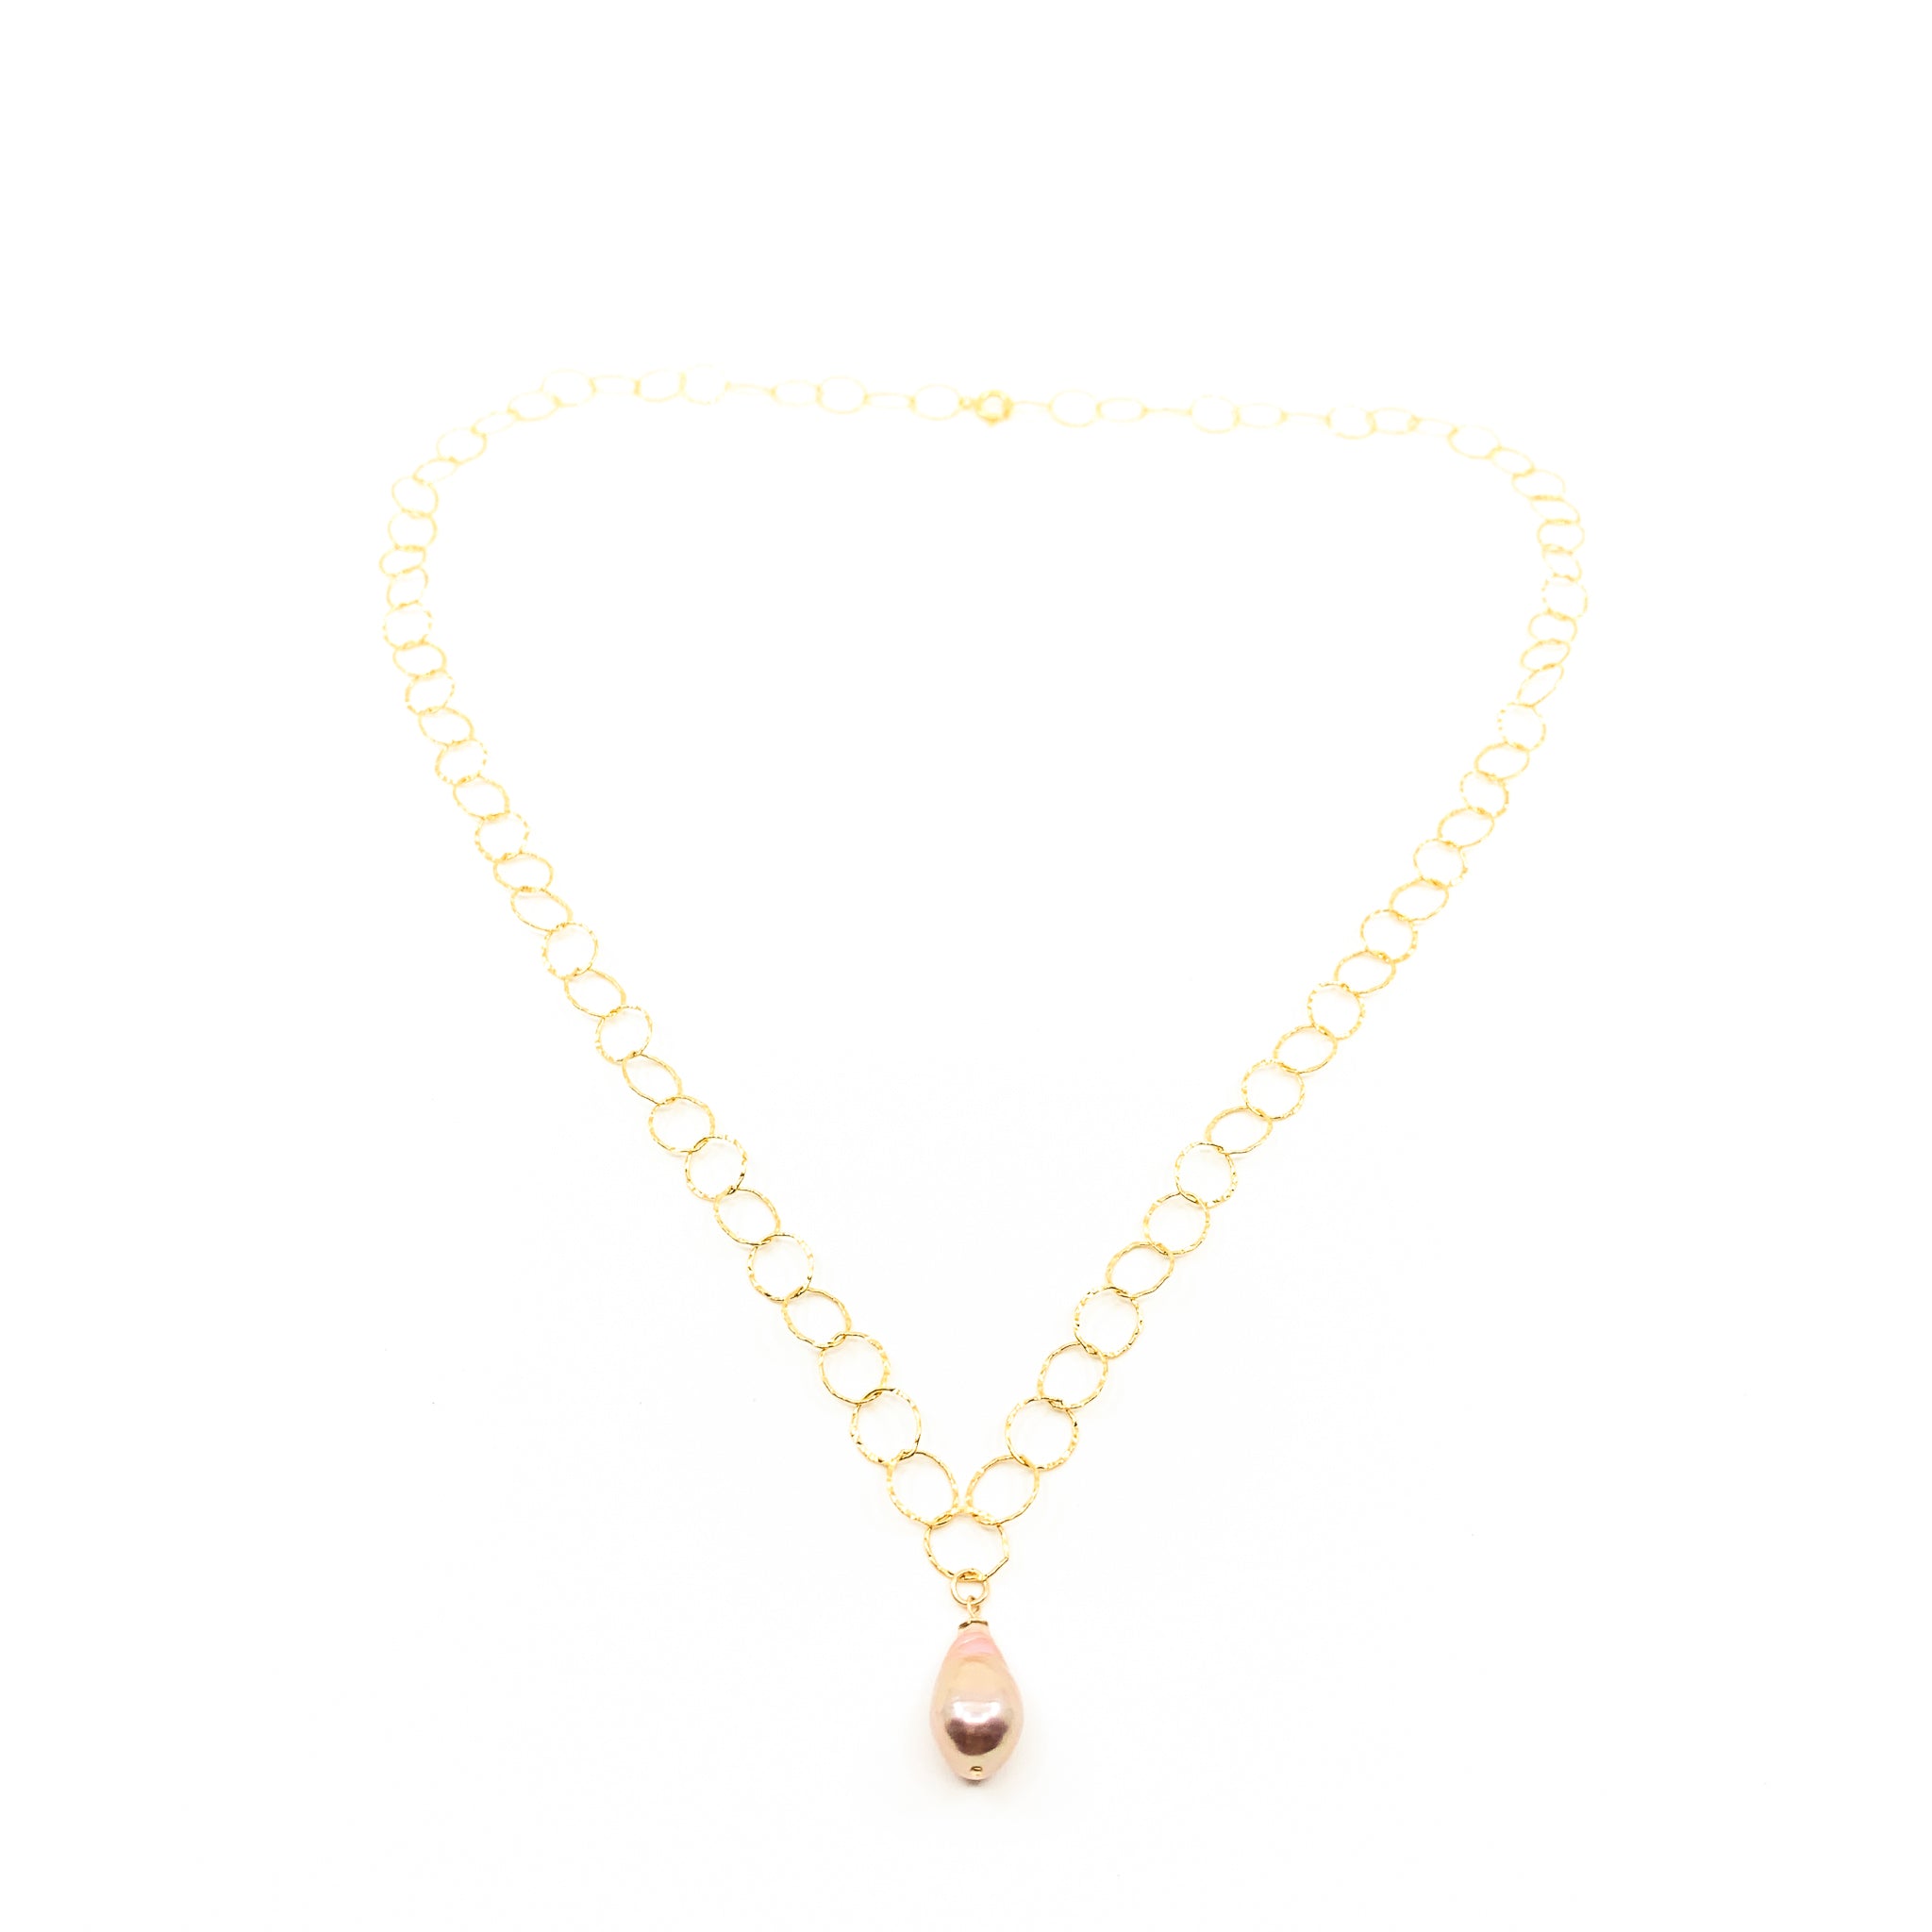 natural pink pearl gold round chain necklace by eve black jewelry made in Hawaii